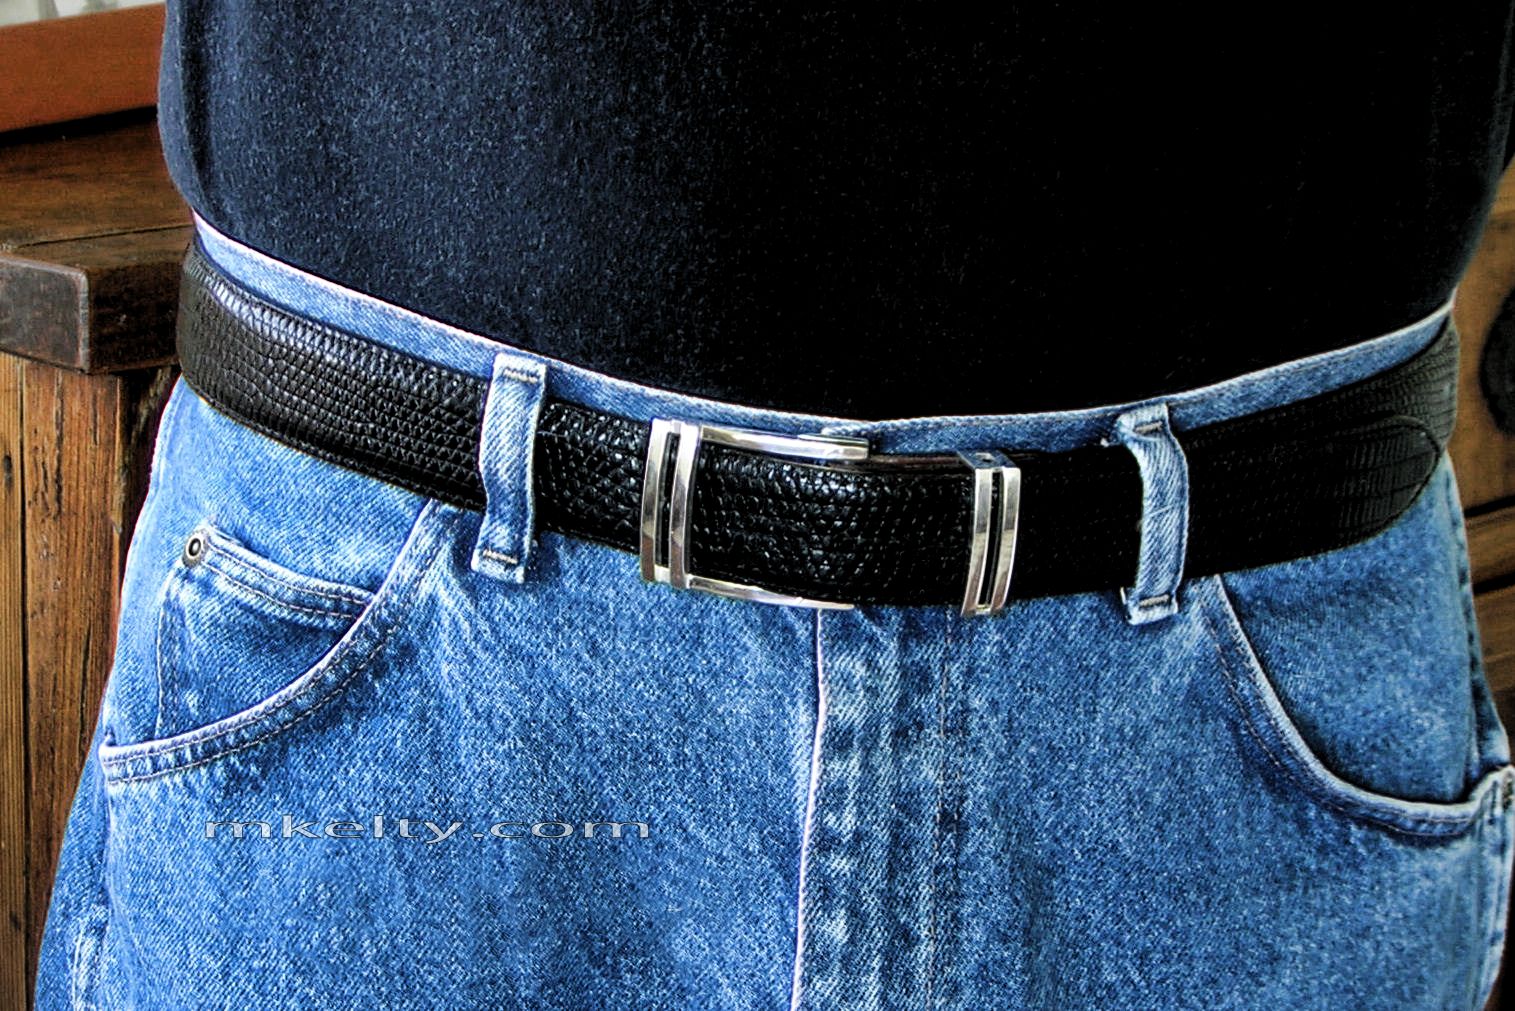 METRO BUCKLE ON JEANS